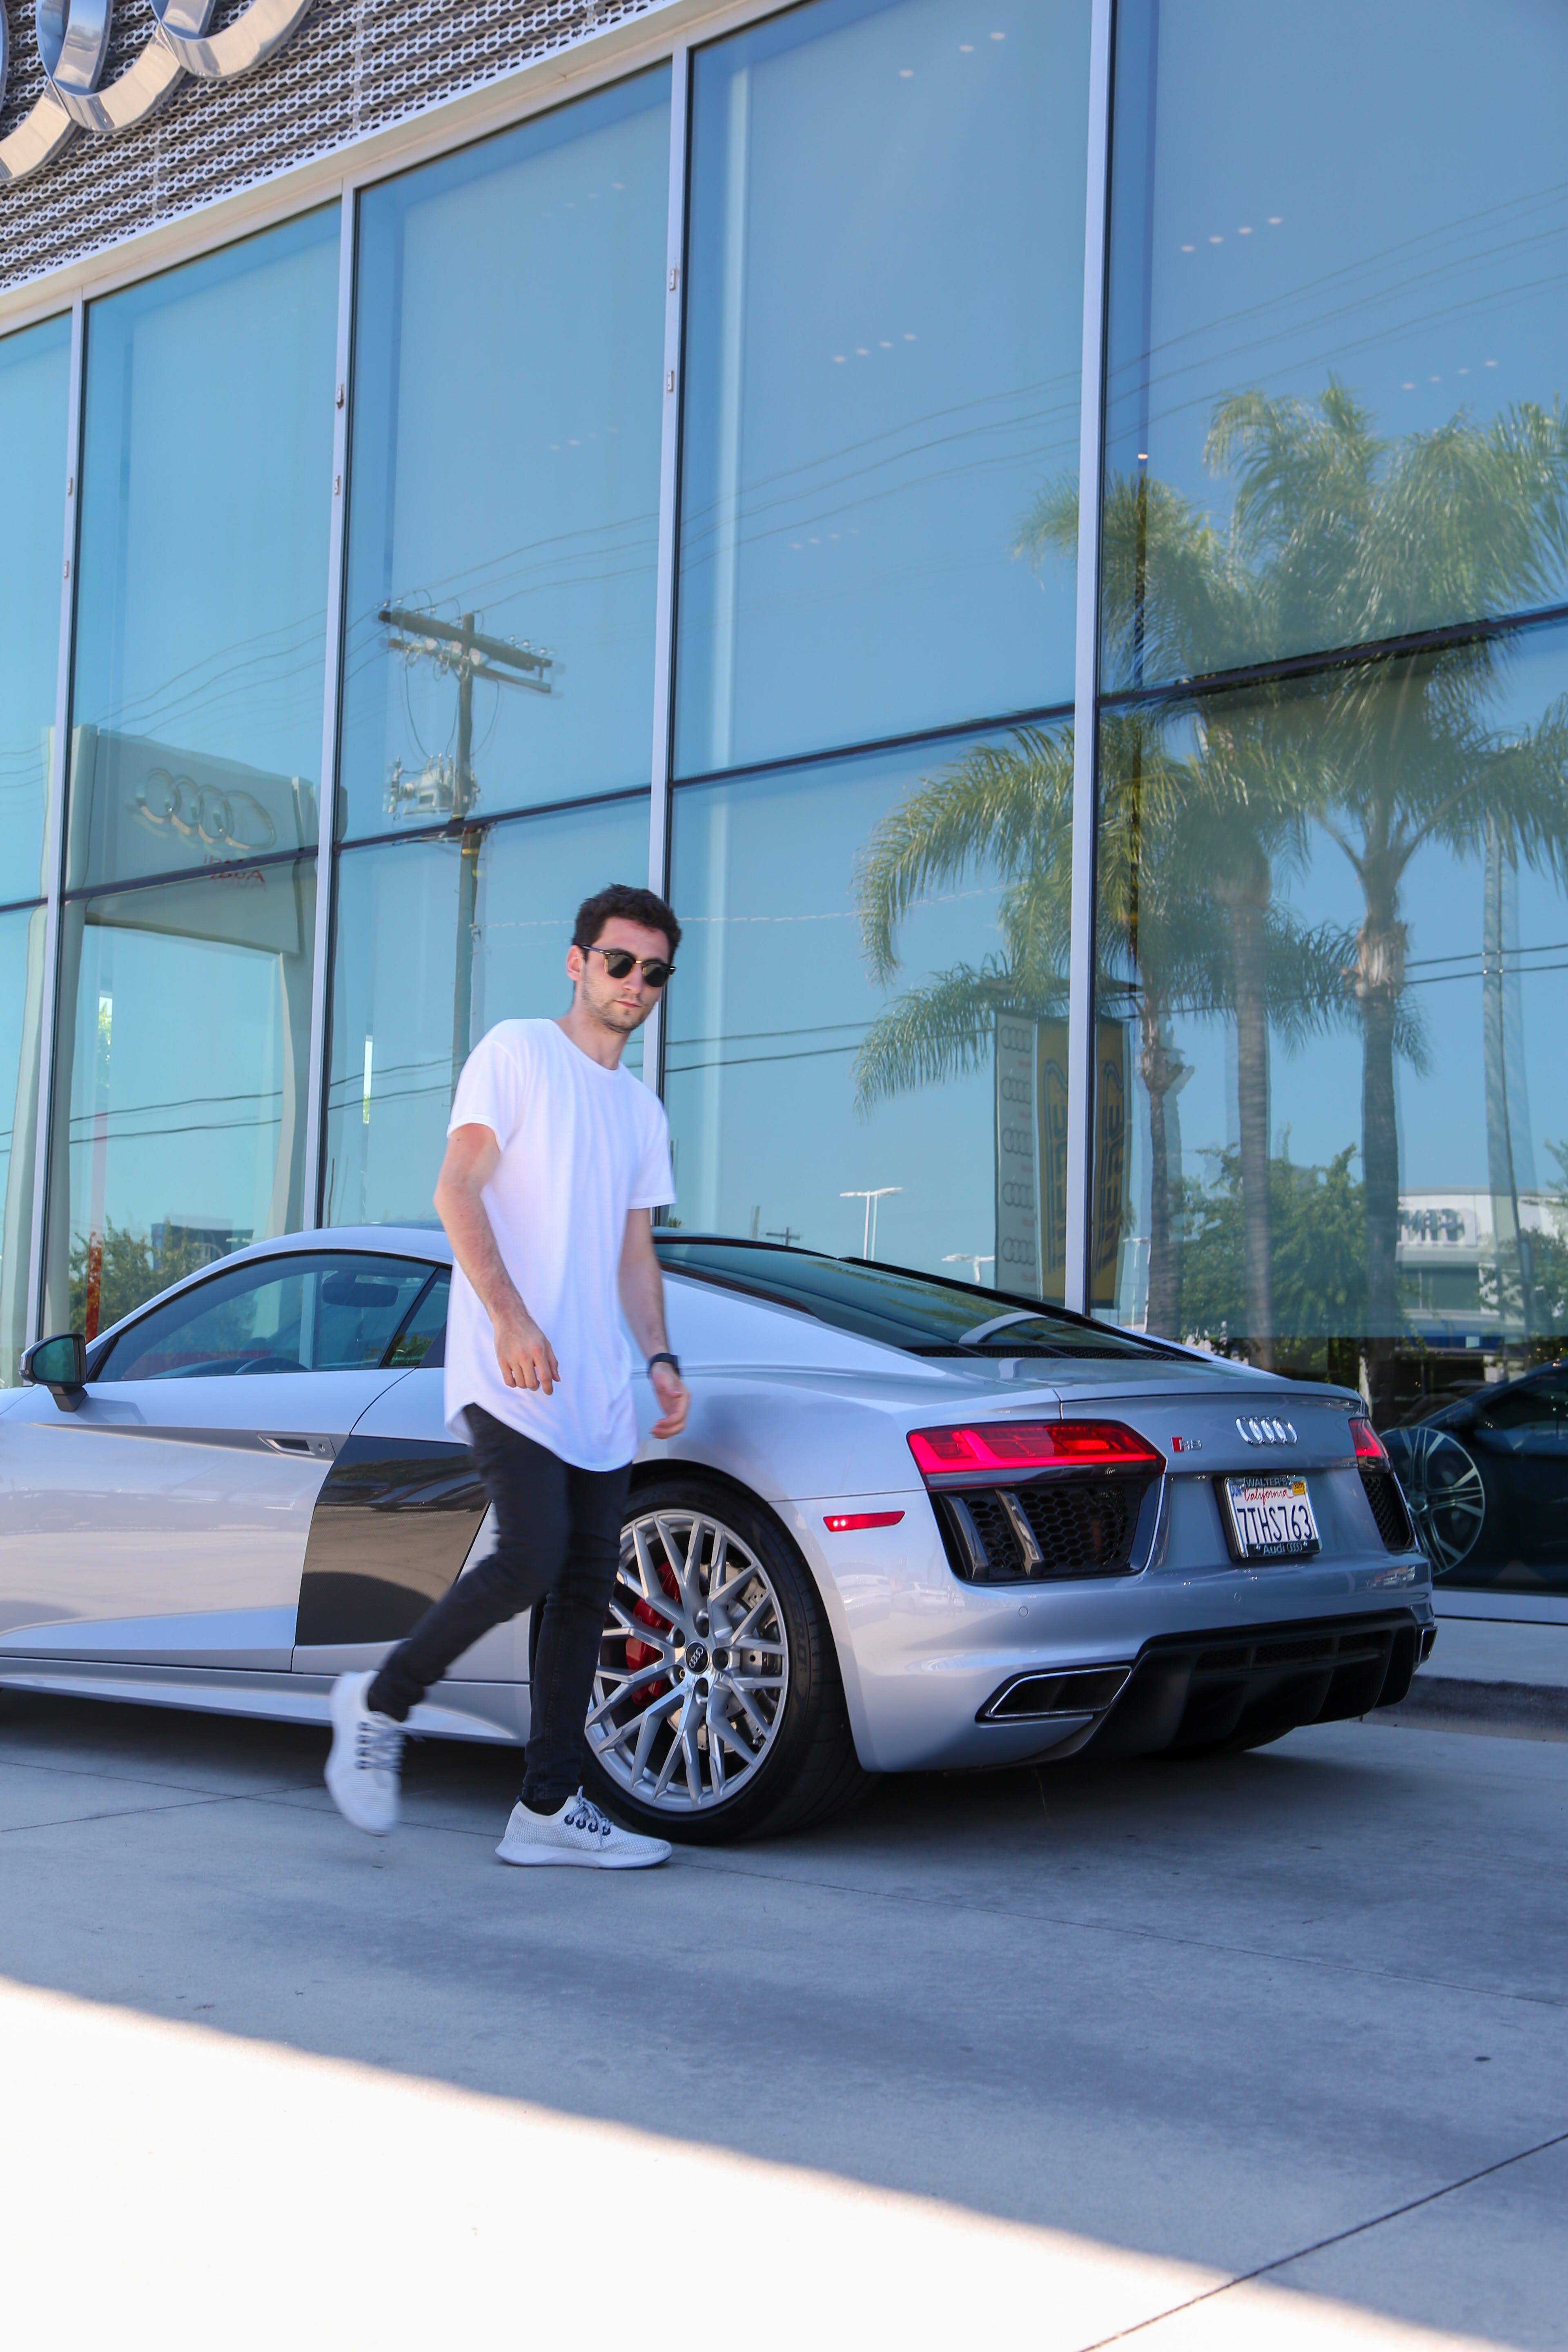 A young man standing next to an expensive car. | Source: Pexels